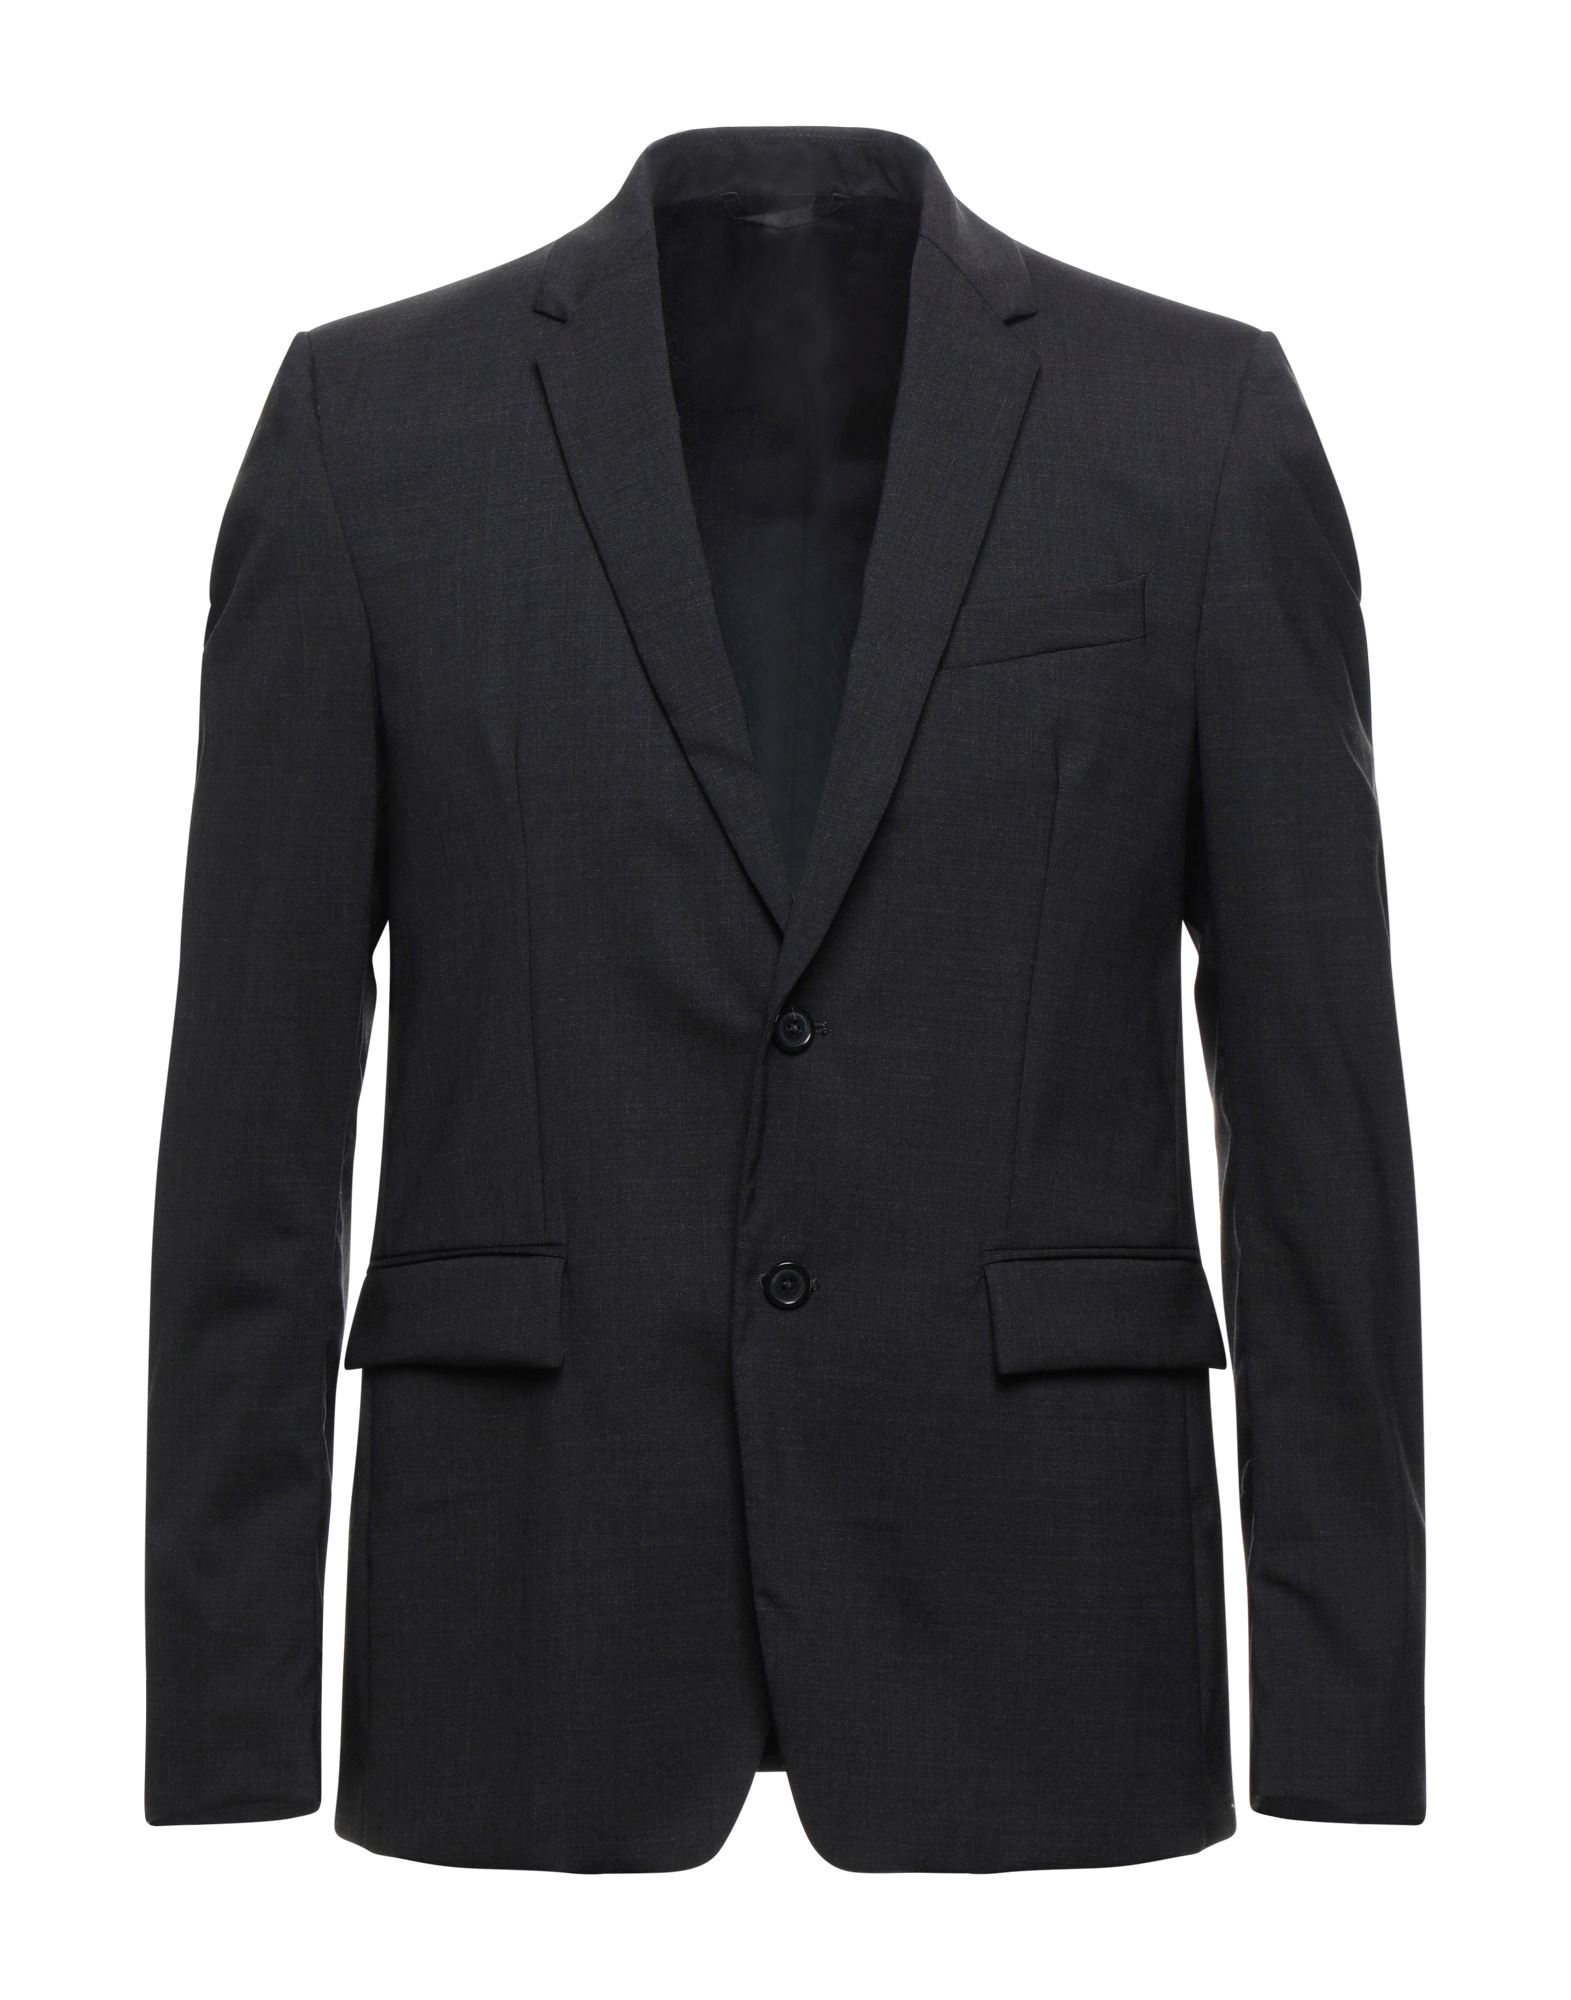 Mauro Grifoni Suit Jackets In Grey